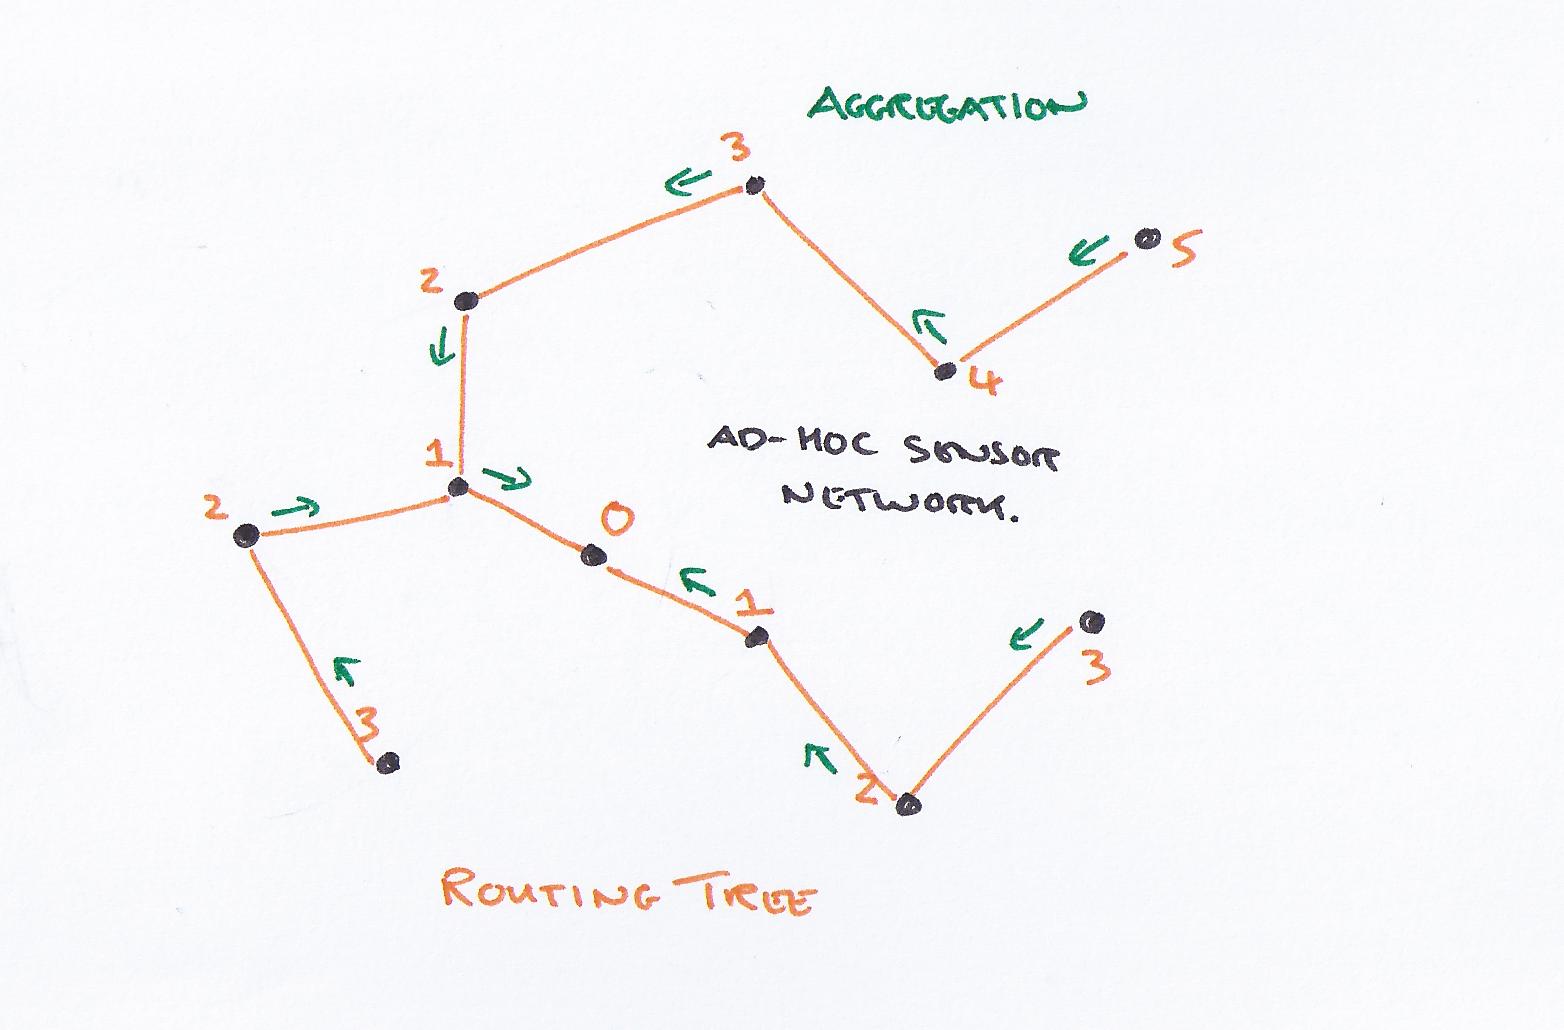 Routing tree